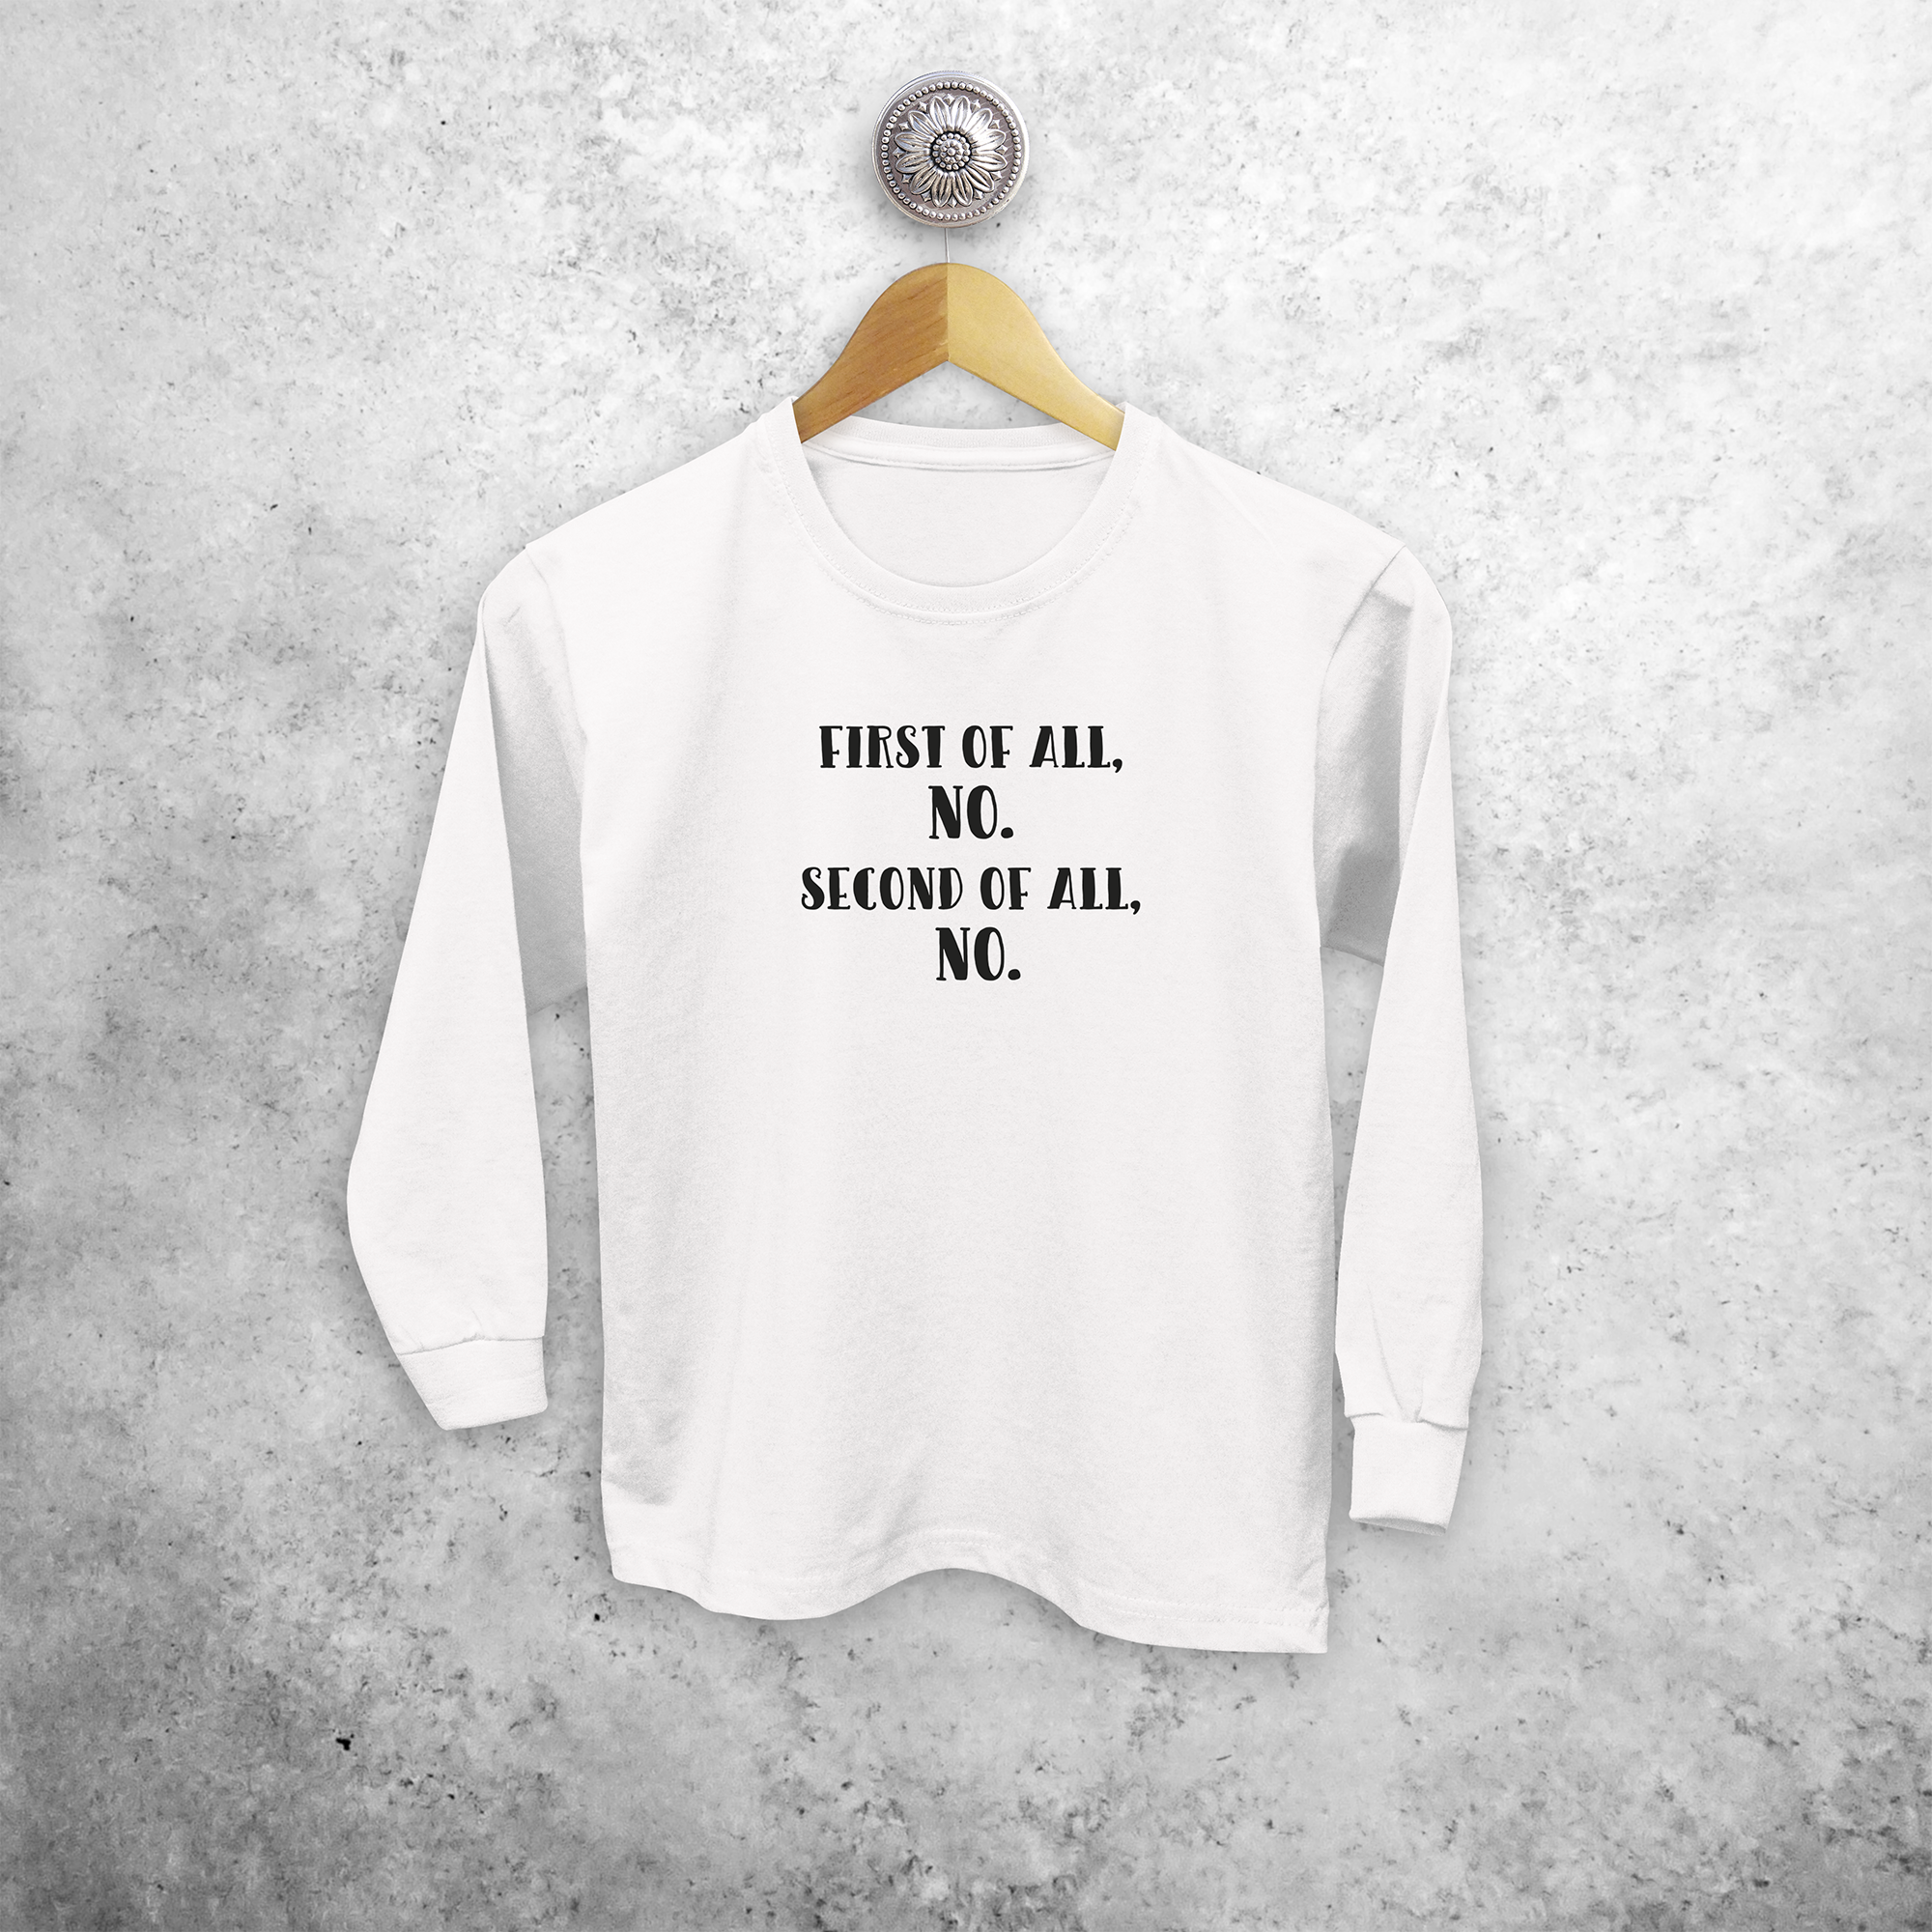 'First of all, no. Second of all, no.' kids longsleeve shirt